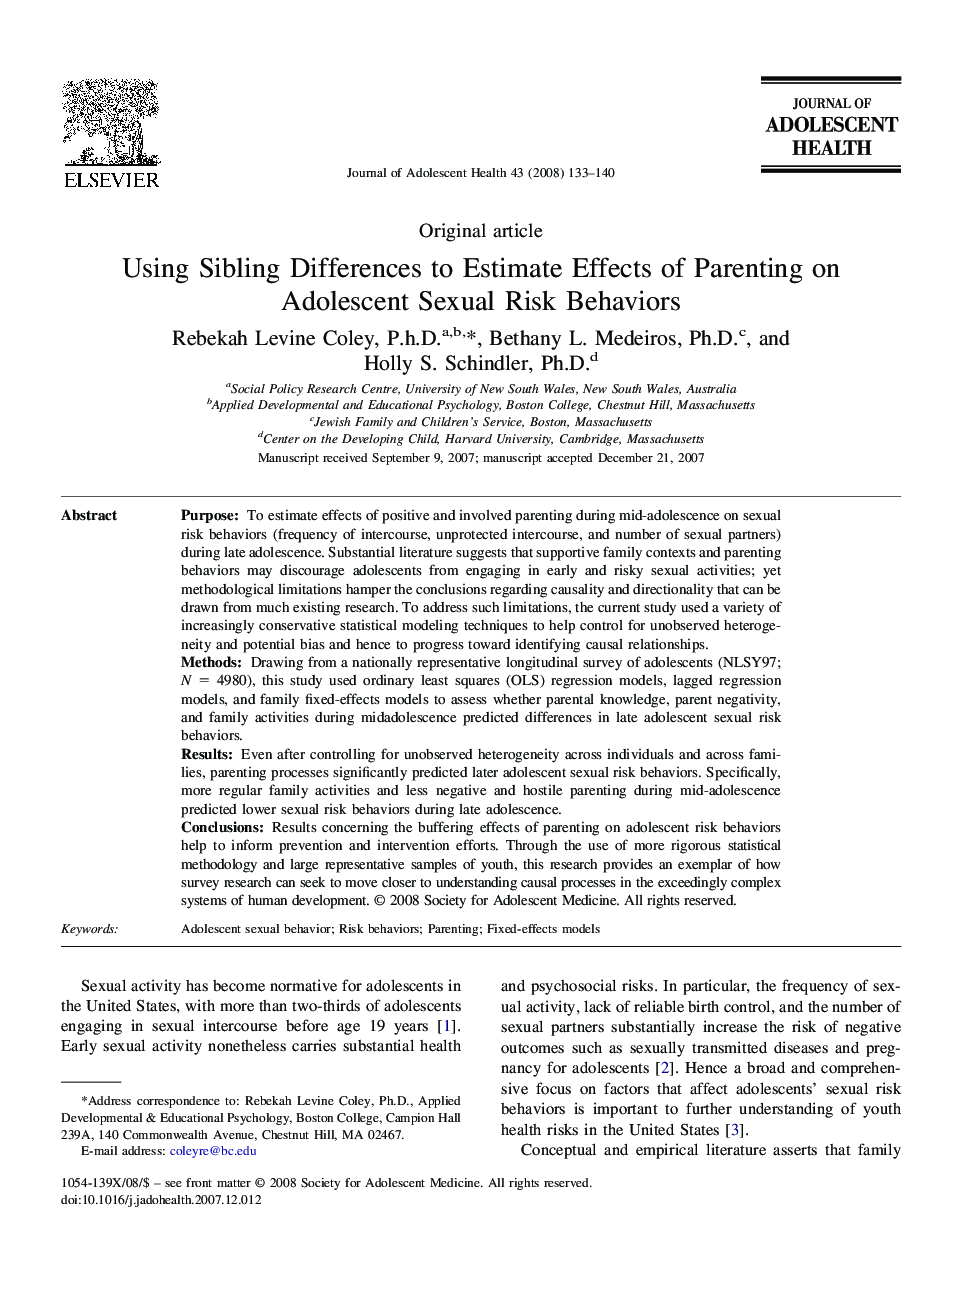 Using Sibling Differences to Estimate Effects of Parenting on Adolescent Sexual Risk Behaviors